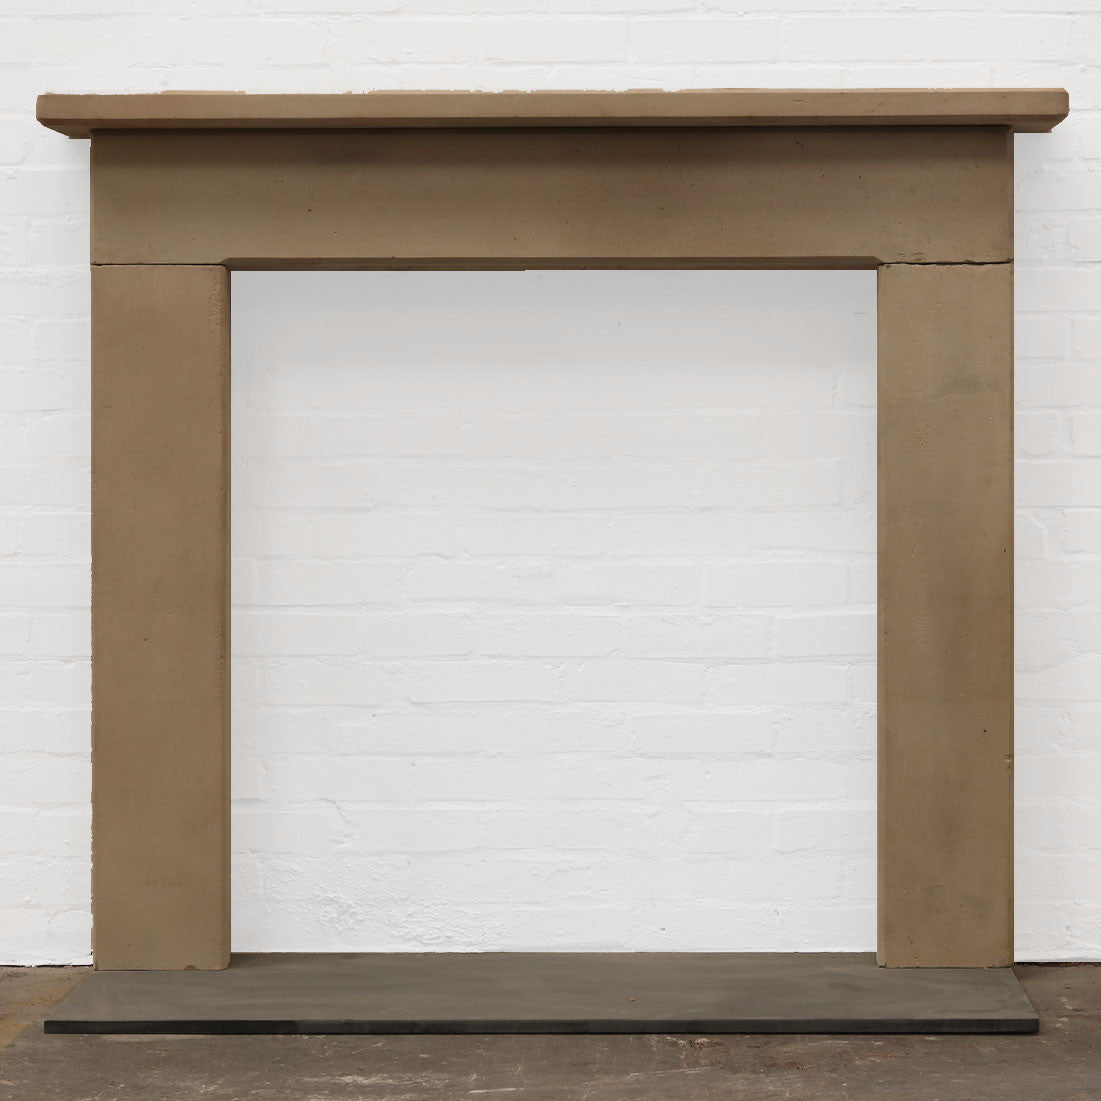 Antique Late 18th Century Limestone Fireplace Surround | The Architectural Forum